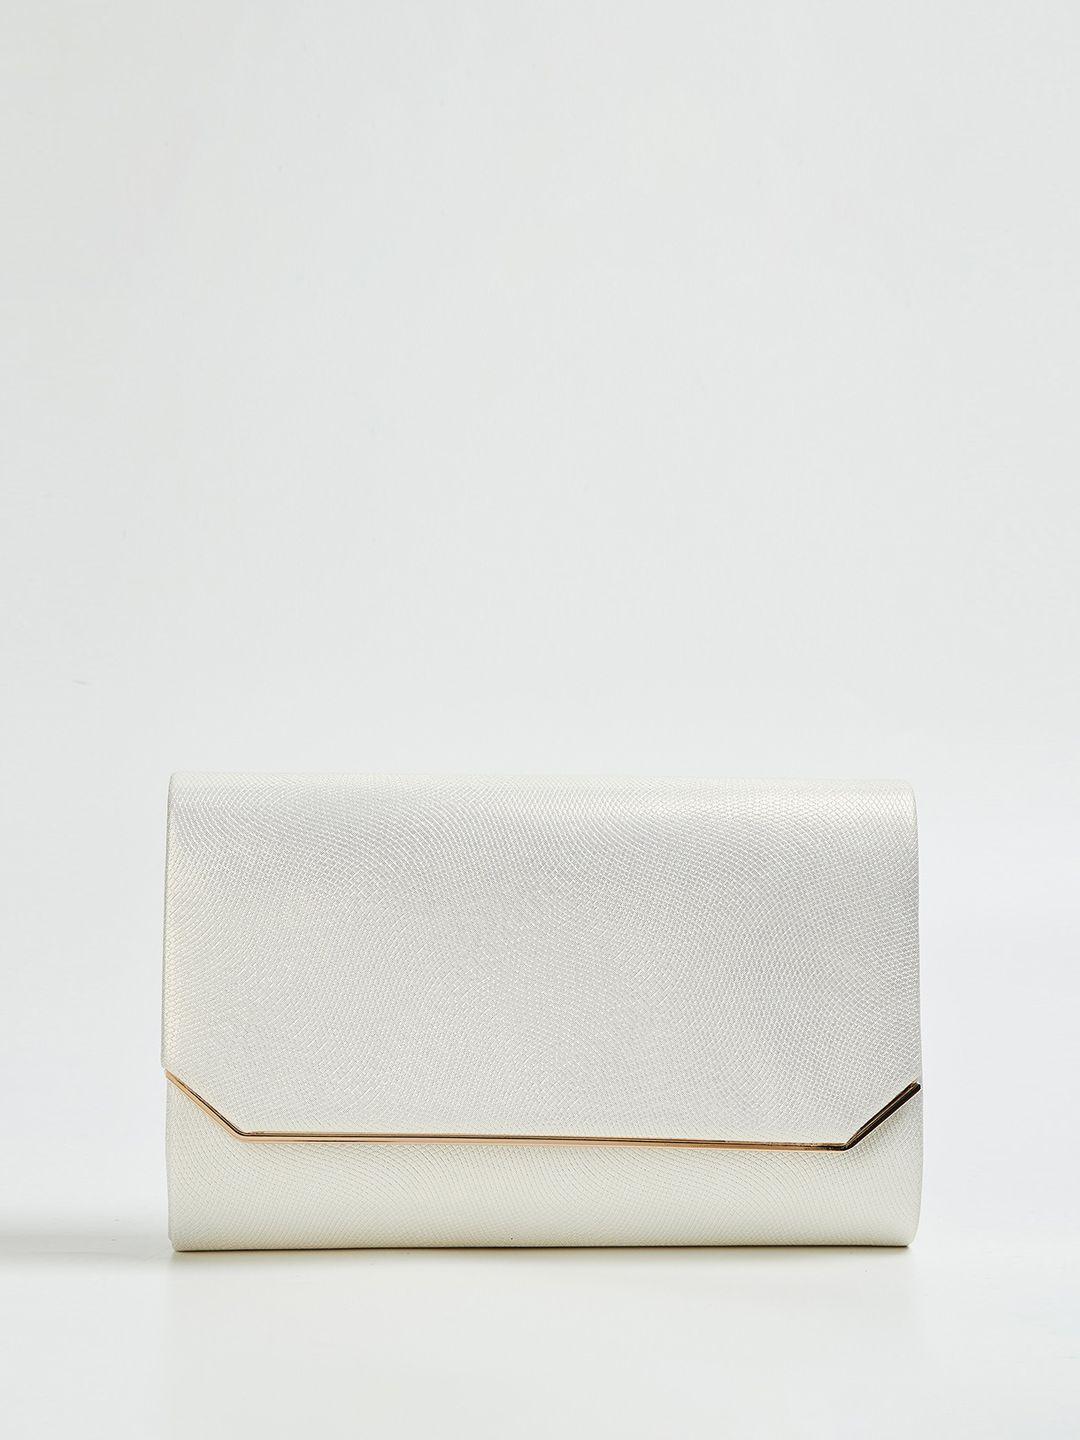 code by lifestyle embellished envelope clutch